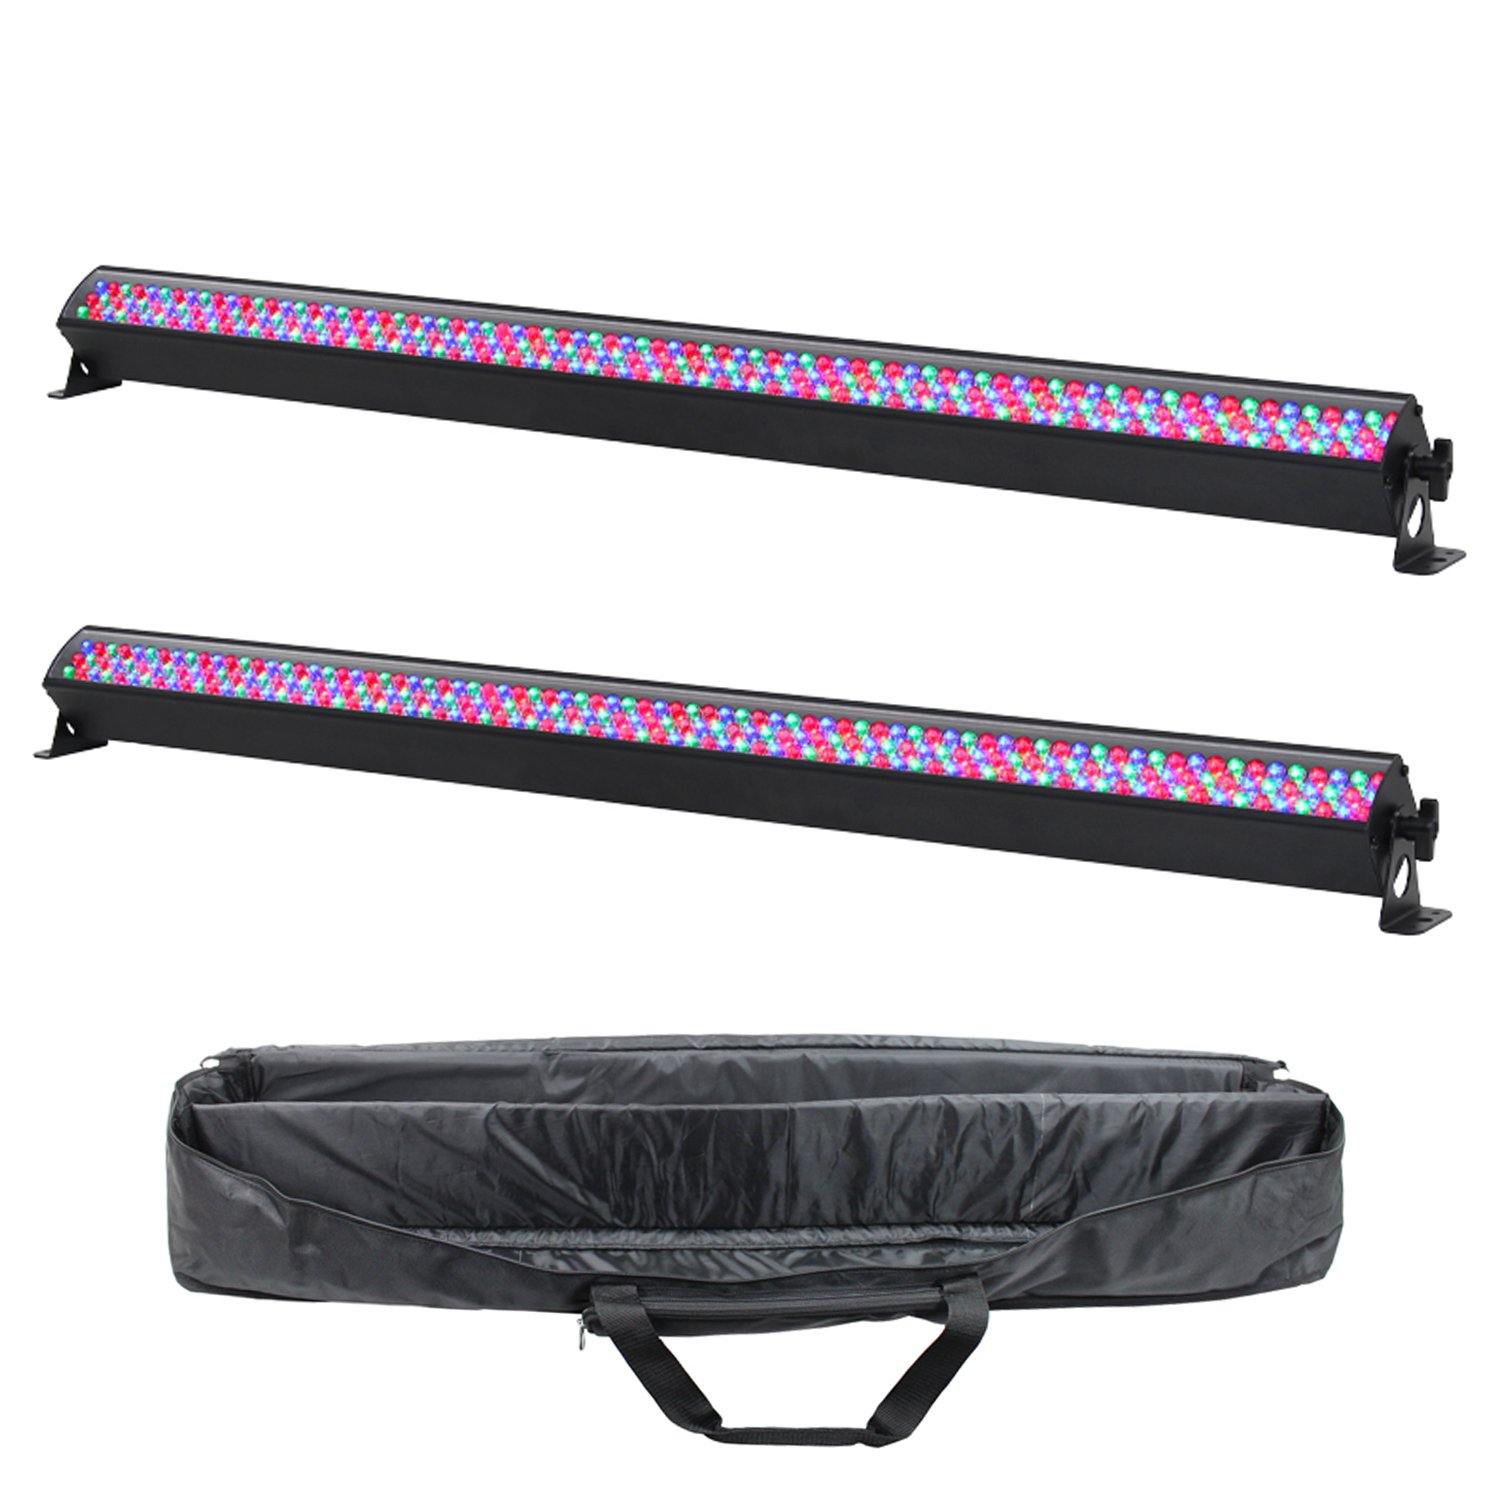 2 x Equinox LED RGB Power Batten Bars with Carry Bag - DY Pro Audio